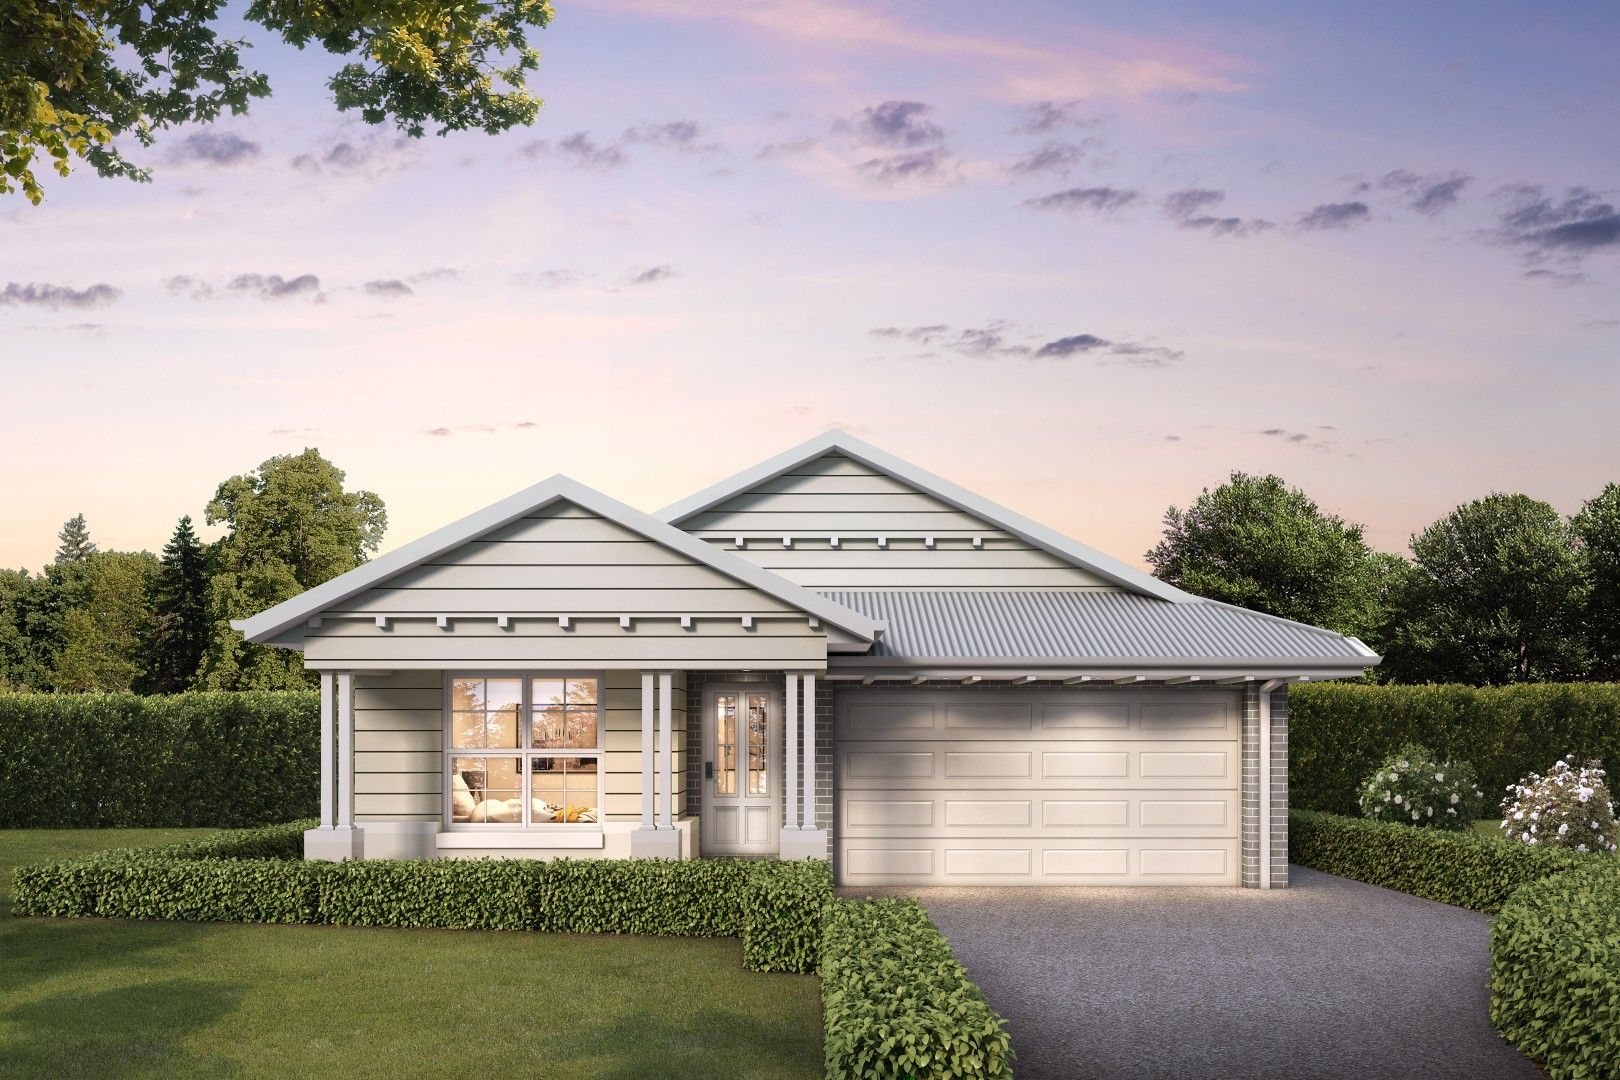 4 bedrooms New House & Land in Manning Way CAMERON PARK NSW, 2285